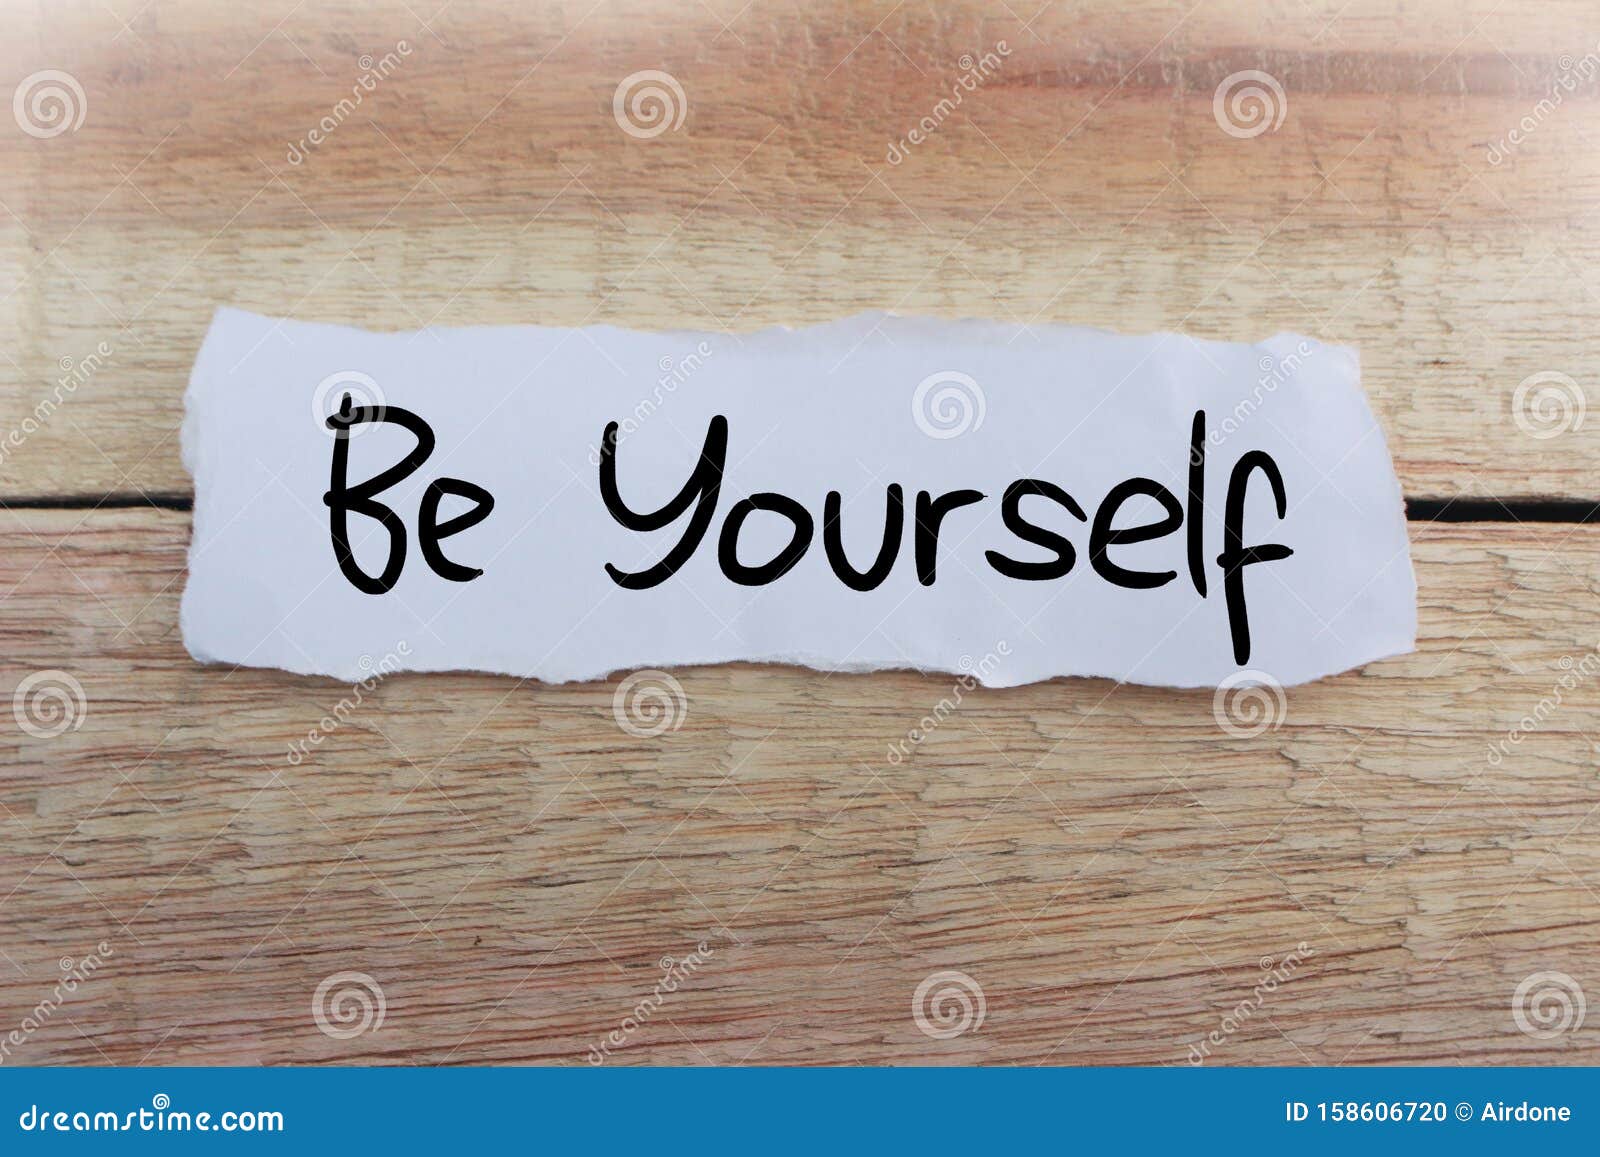 be yourself, motivational business words quotes concept